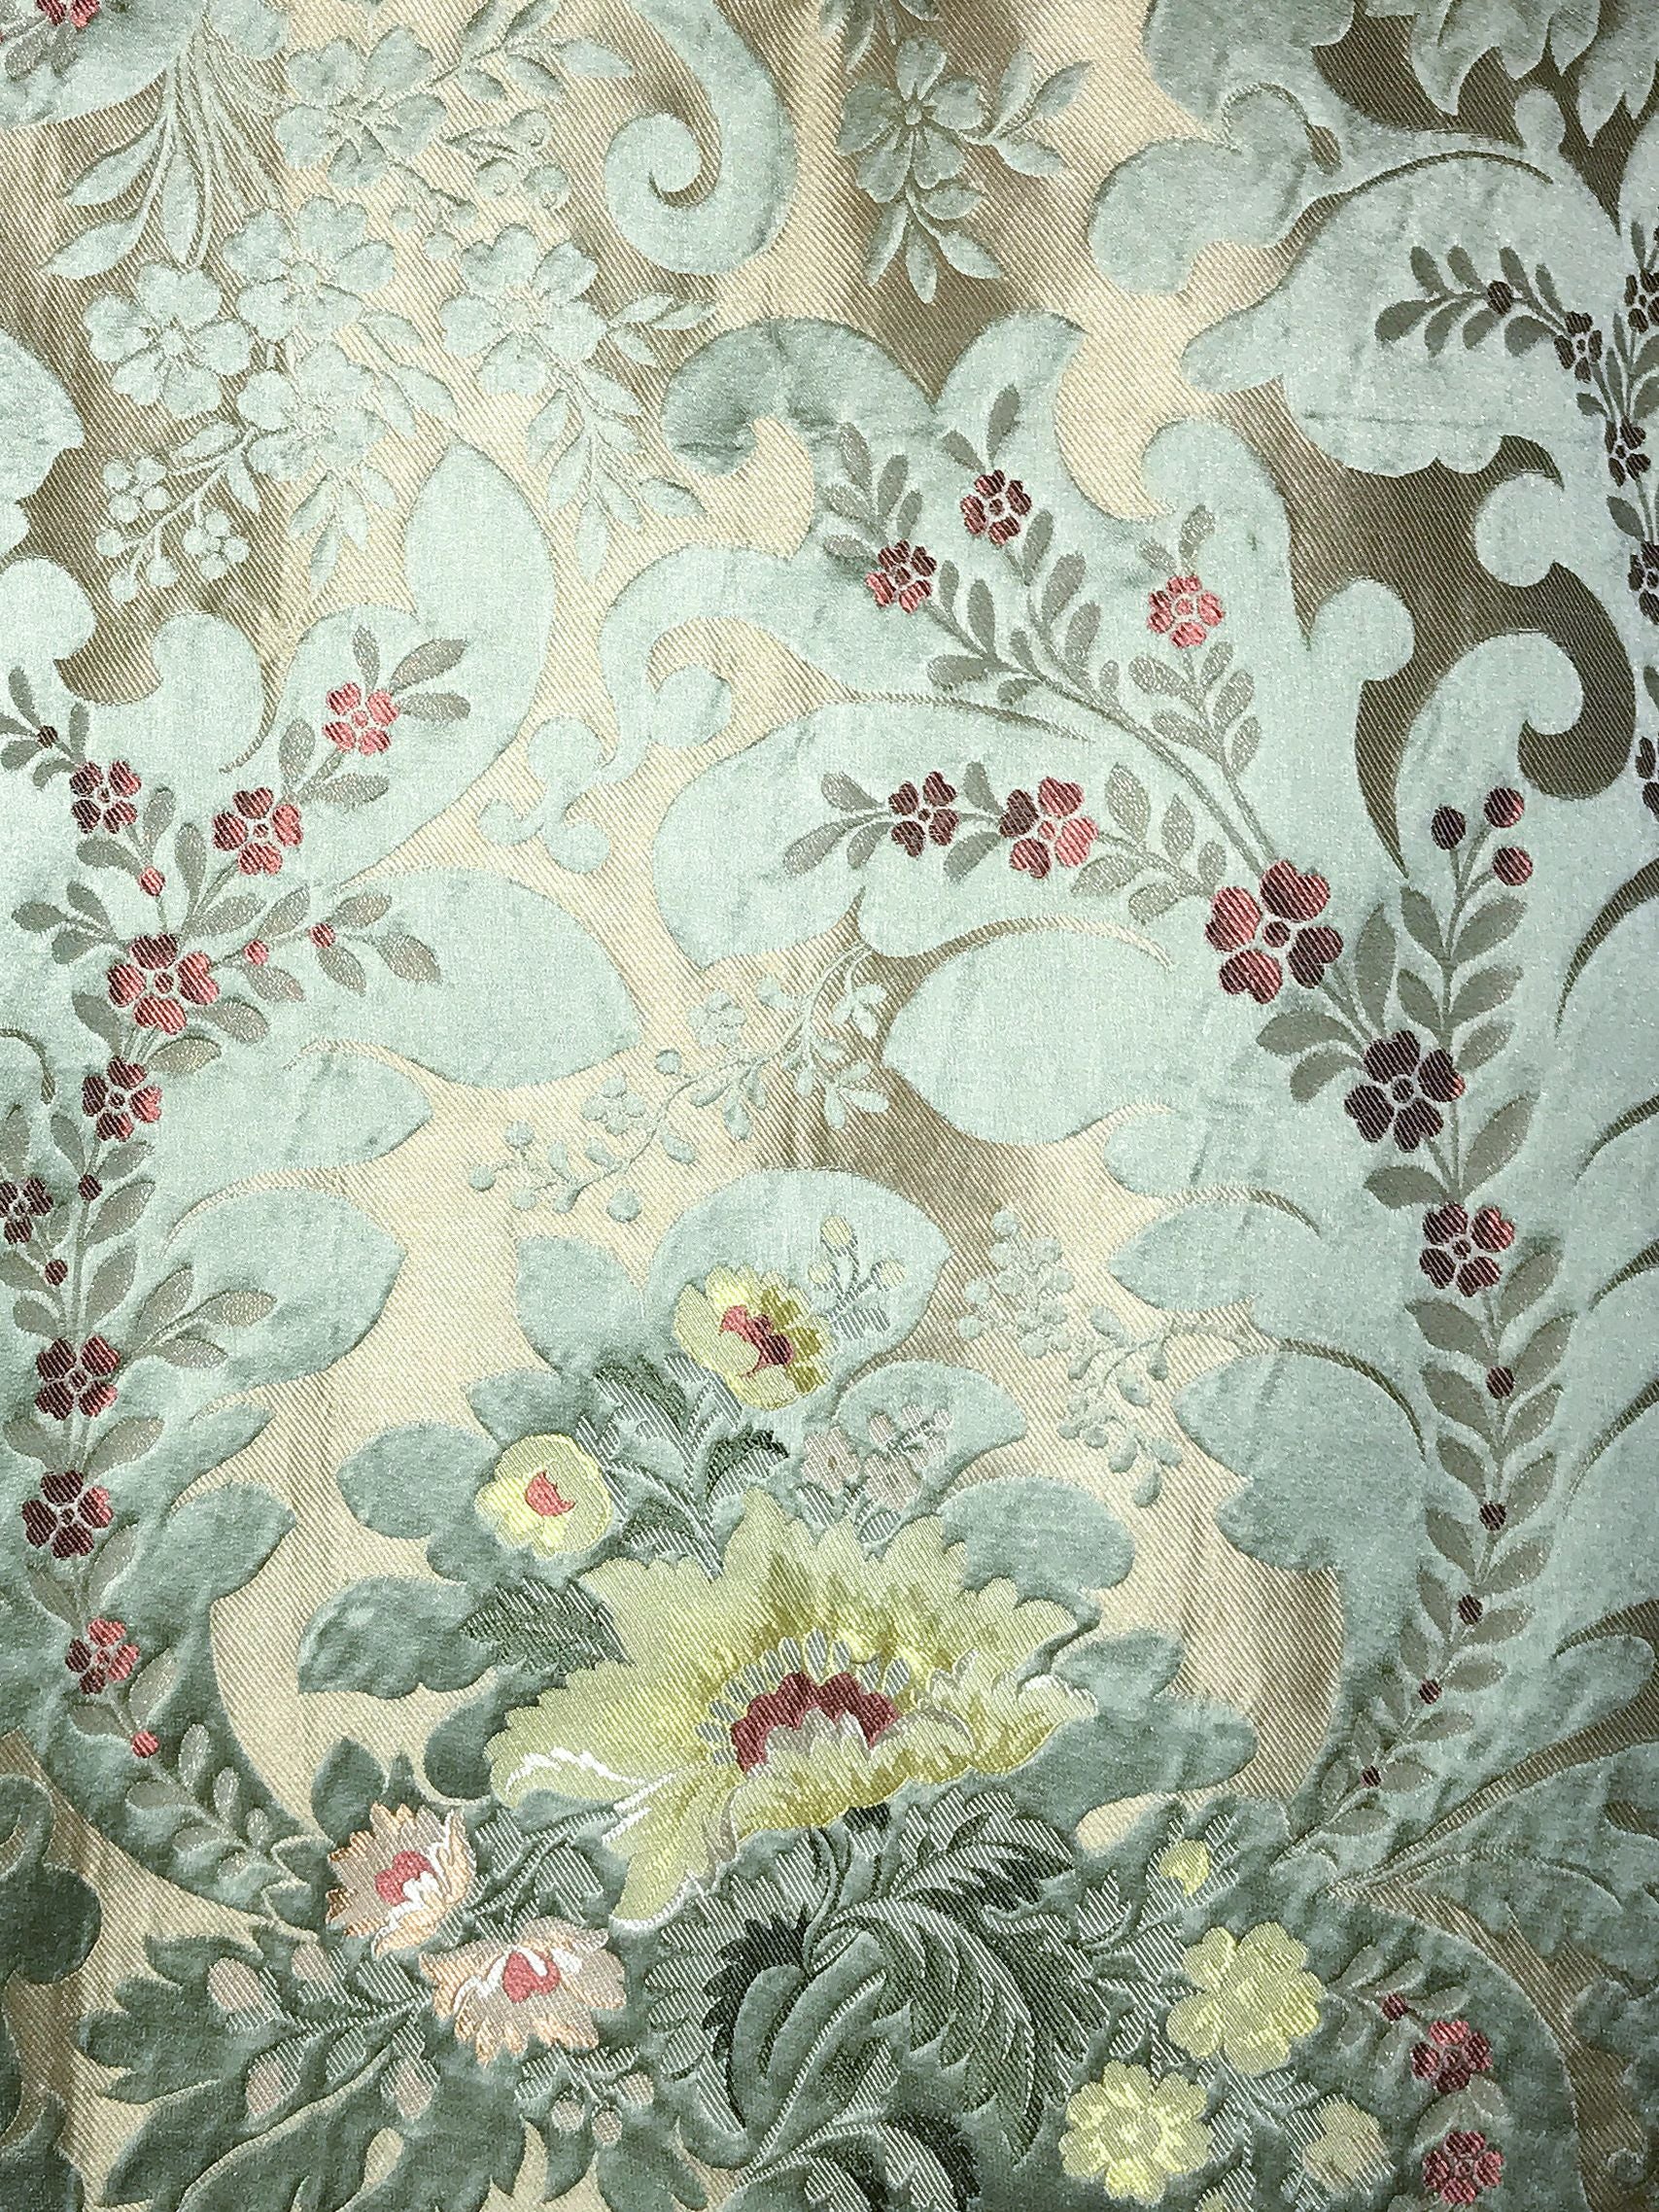 Rimini fabric in celadon color - pattern number SB 00022473 - by Scalamandre in the Old World Weavers collection